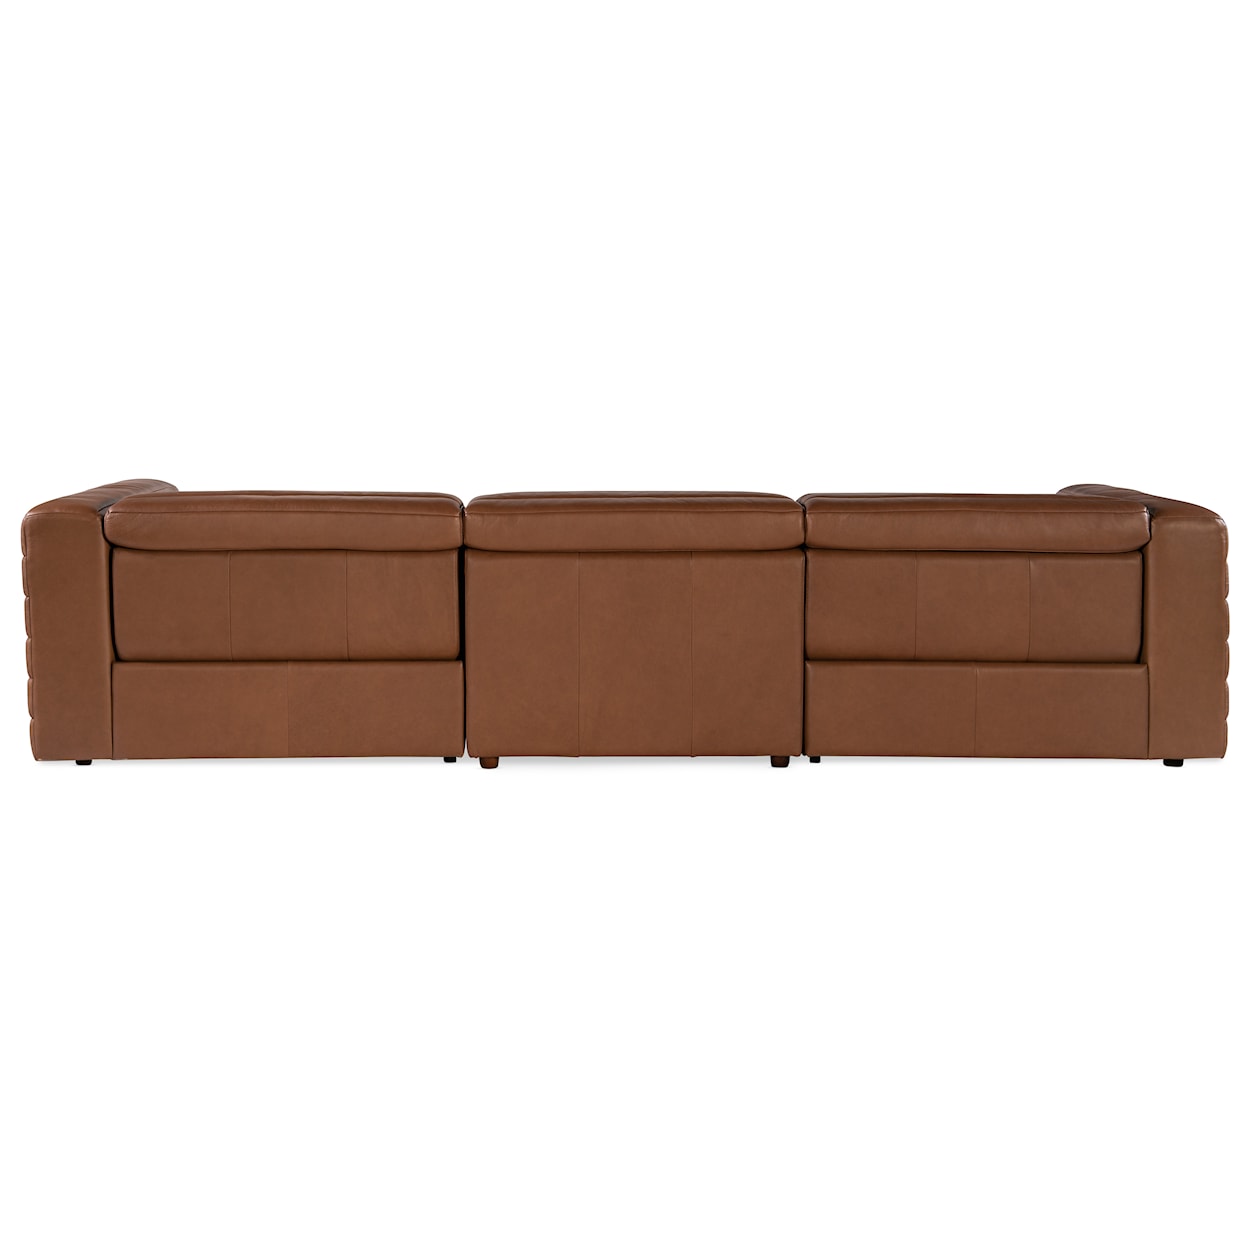 Hooker Furniture Chatelain 3-Piece Power Sofa with Power Headrest